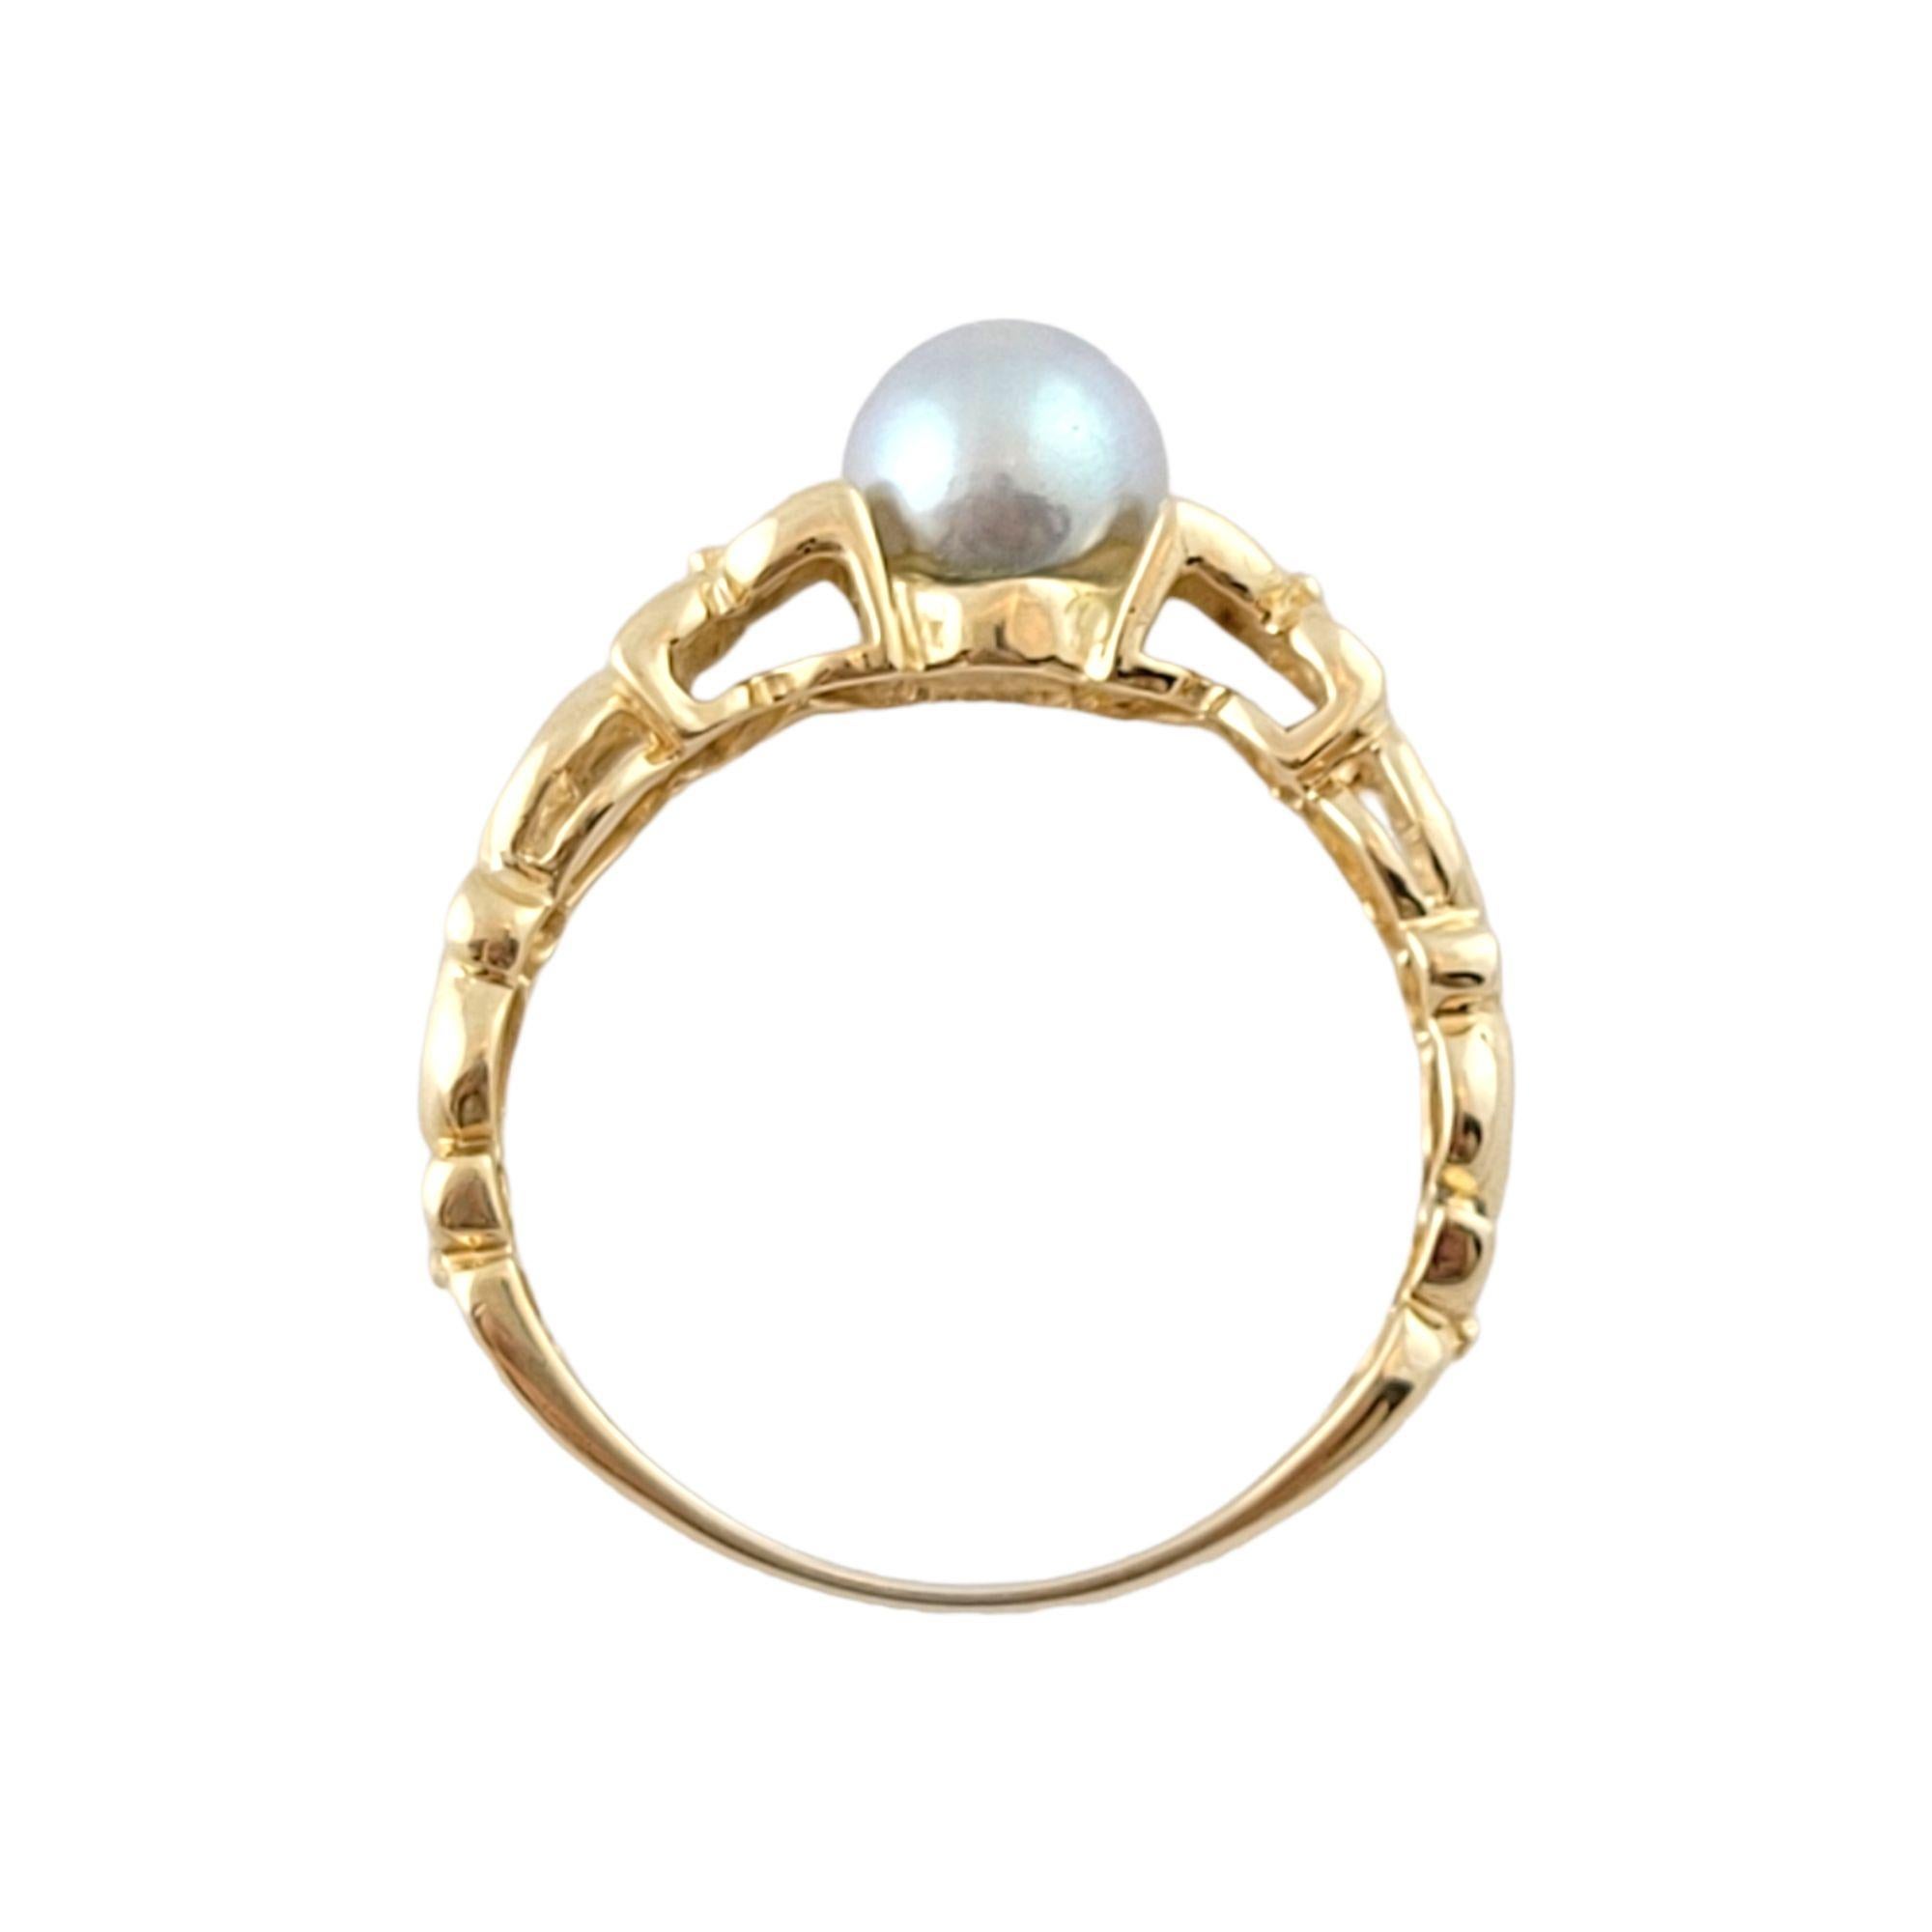 Vintage 14K Yellow Gold Pearl Ring Size 7.75

This gorgeous 14K gold ring is detailed to perfection and paired with 1 beautiful black pearl to bring it all together!

Size: 7.75
Shank: 2mm
Pearl: 7mm diameter

Weight: 3.1 g/ 1.9 dwt

Hallmark: S